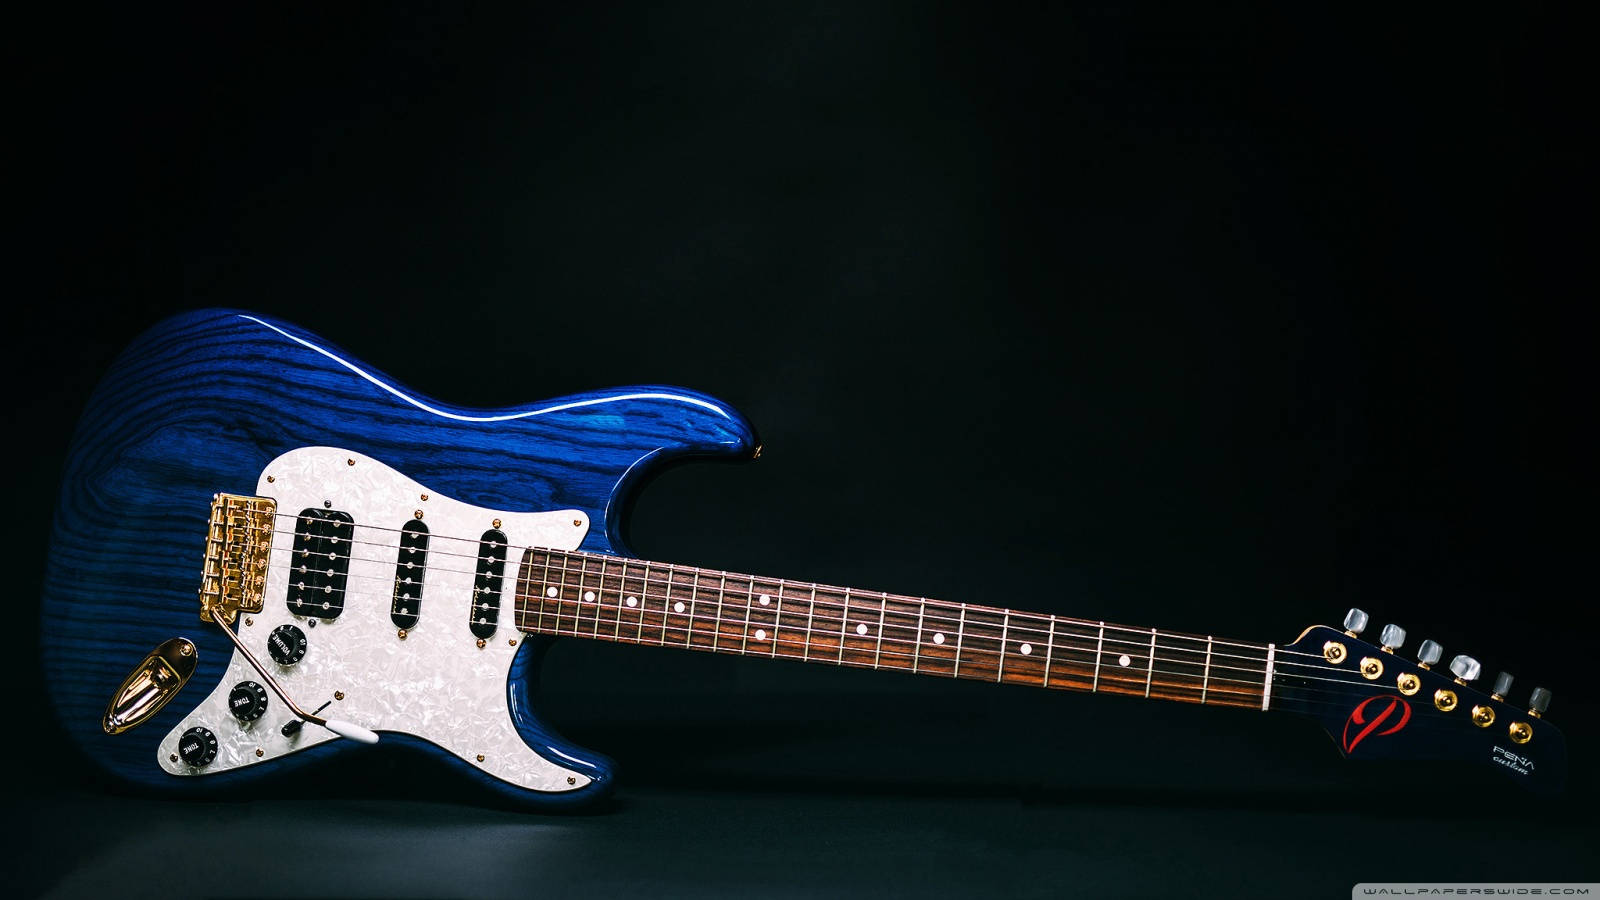 Royal Blue Electric Guitar Background